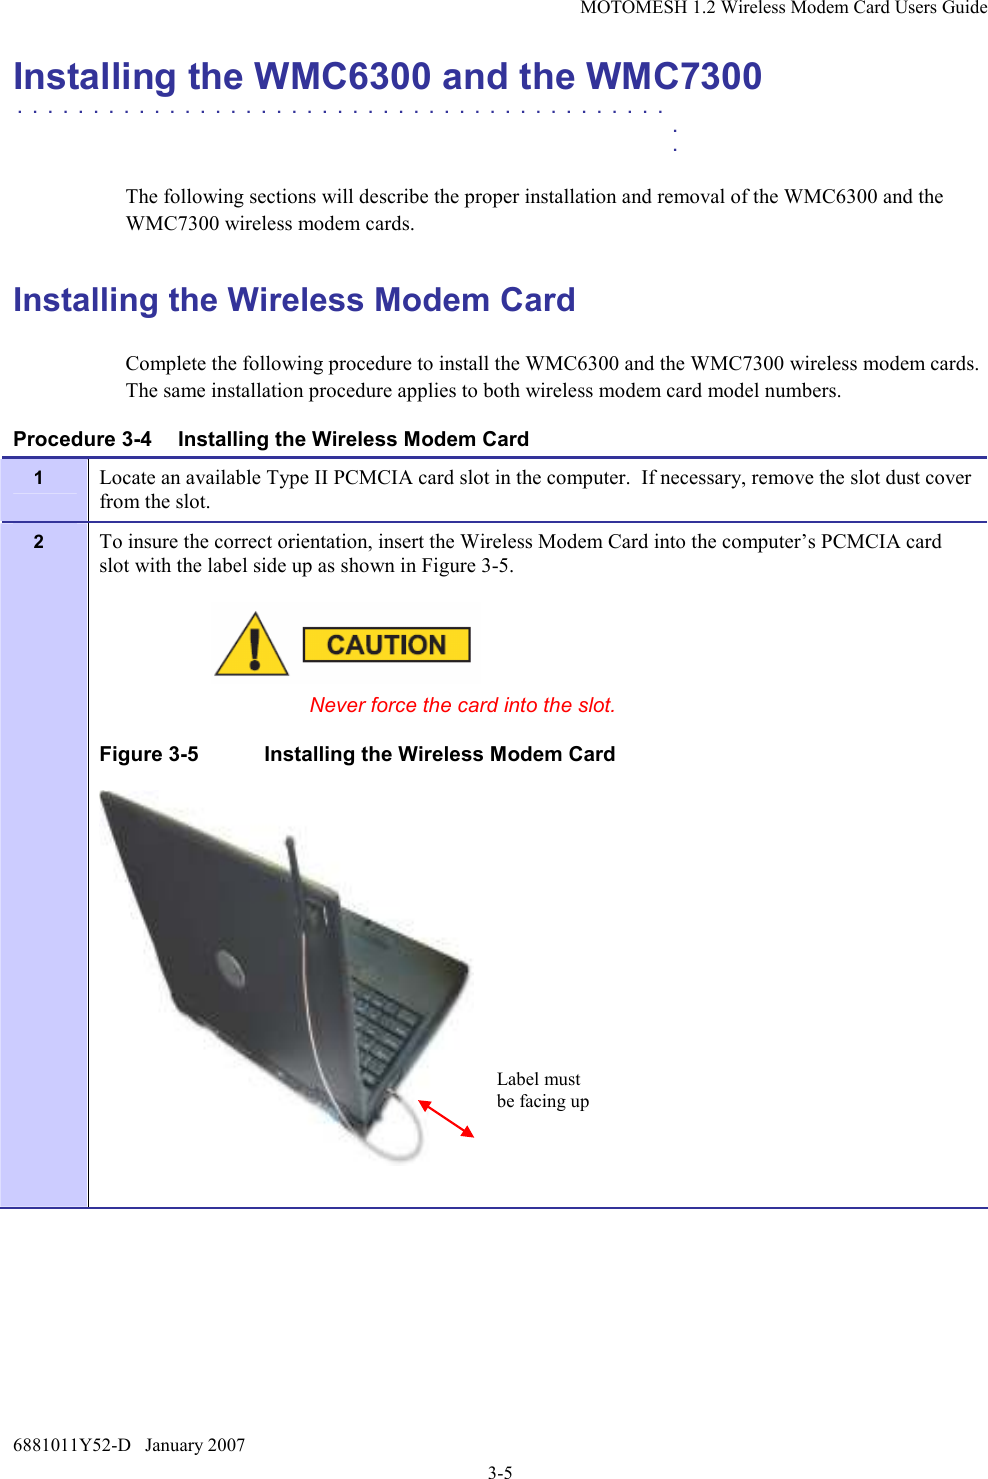 MOTOMESH 1.2 Wireless Modem Card Users Guide 6881011Y52-D   January 2007 3-5 Installing the WMC6300 and the WMC7300 . . . . . . . . . . . . . . . . . . . . . . . . . . . . . . . . . . . . . . . . . . .    .    .  The following sections will describe the proper installation and removal of the WMC6300 and the WMC7300 wireless modem cards.  Installing the Wireless Modem Card Complete the following procedure to install the WMC6300 and the WMC7300 wireless modem cards. The same installation procedure applies to both wireless modem card model numbers.  Procedure 3-4  Installing the Wireless Modem Card 1  Locate an available Type II PCMCIA card slot in the computer.  If necessary, remove the slot dust cover from the slot. 2  To insure the correct orientation, insert the Wireless Modem Card into the computer’s PCMCIA card slot with the label side up as shown in Figure 3-5.    Never force the card into the slot. Figure 3-5  Installing the Wireless Modem Card   Label must be facing up 